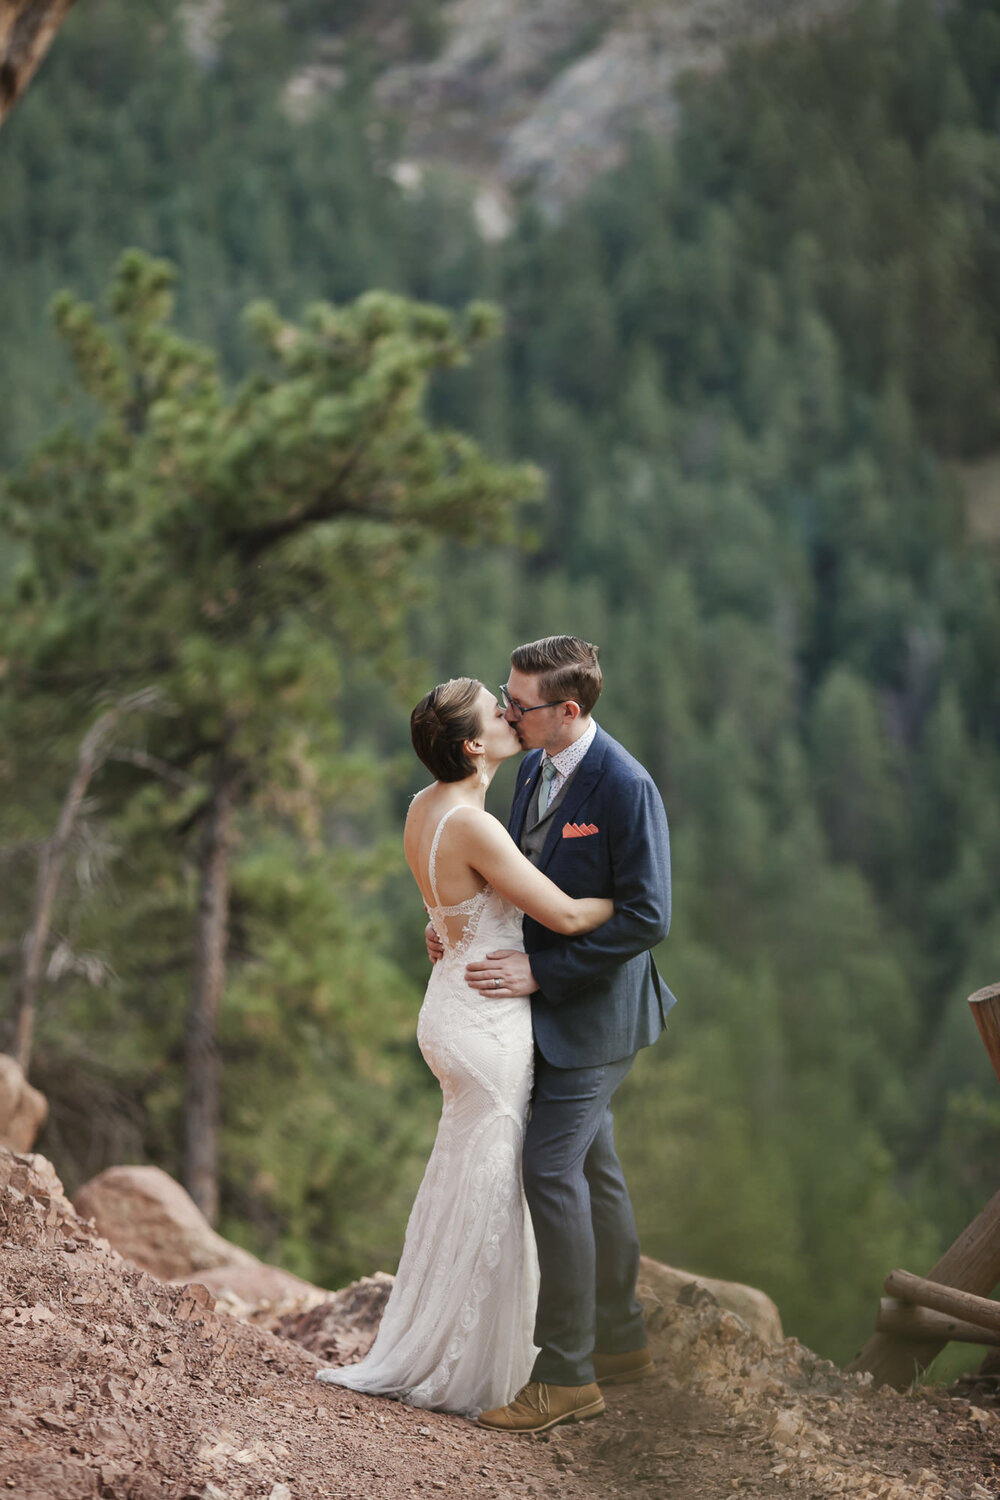 Adventure elopement couple kiss with a forest of trees behind them near Boulder Colorado